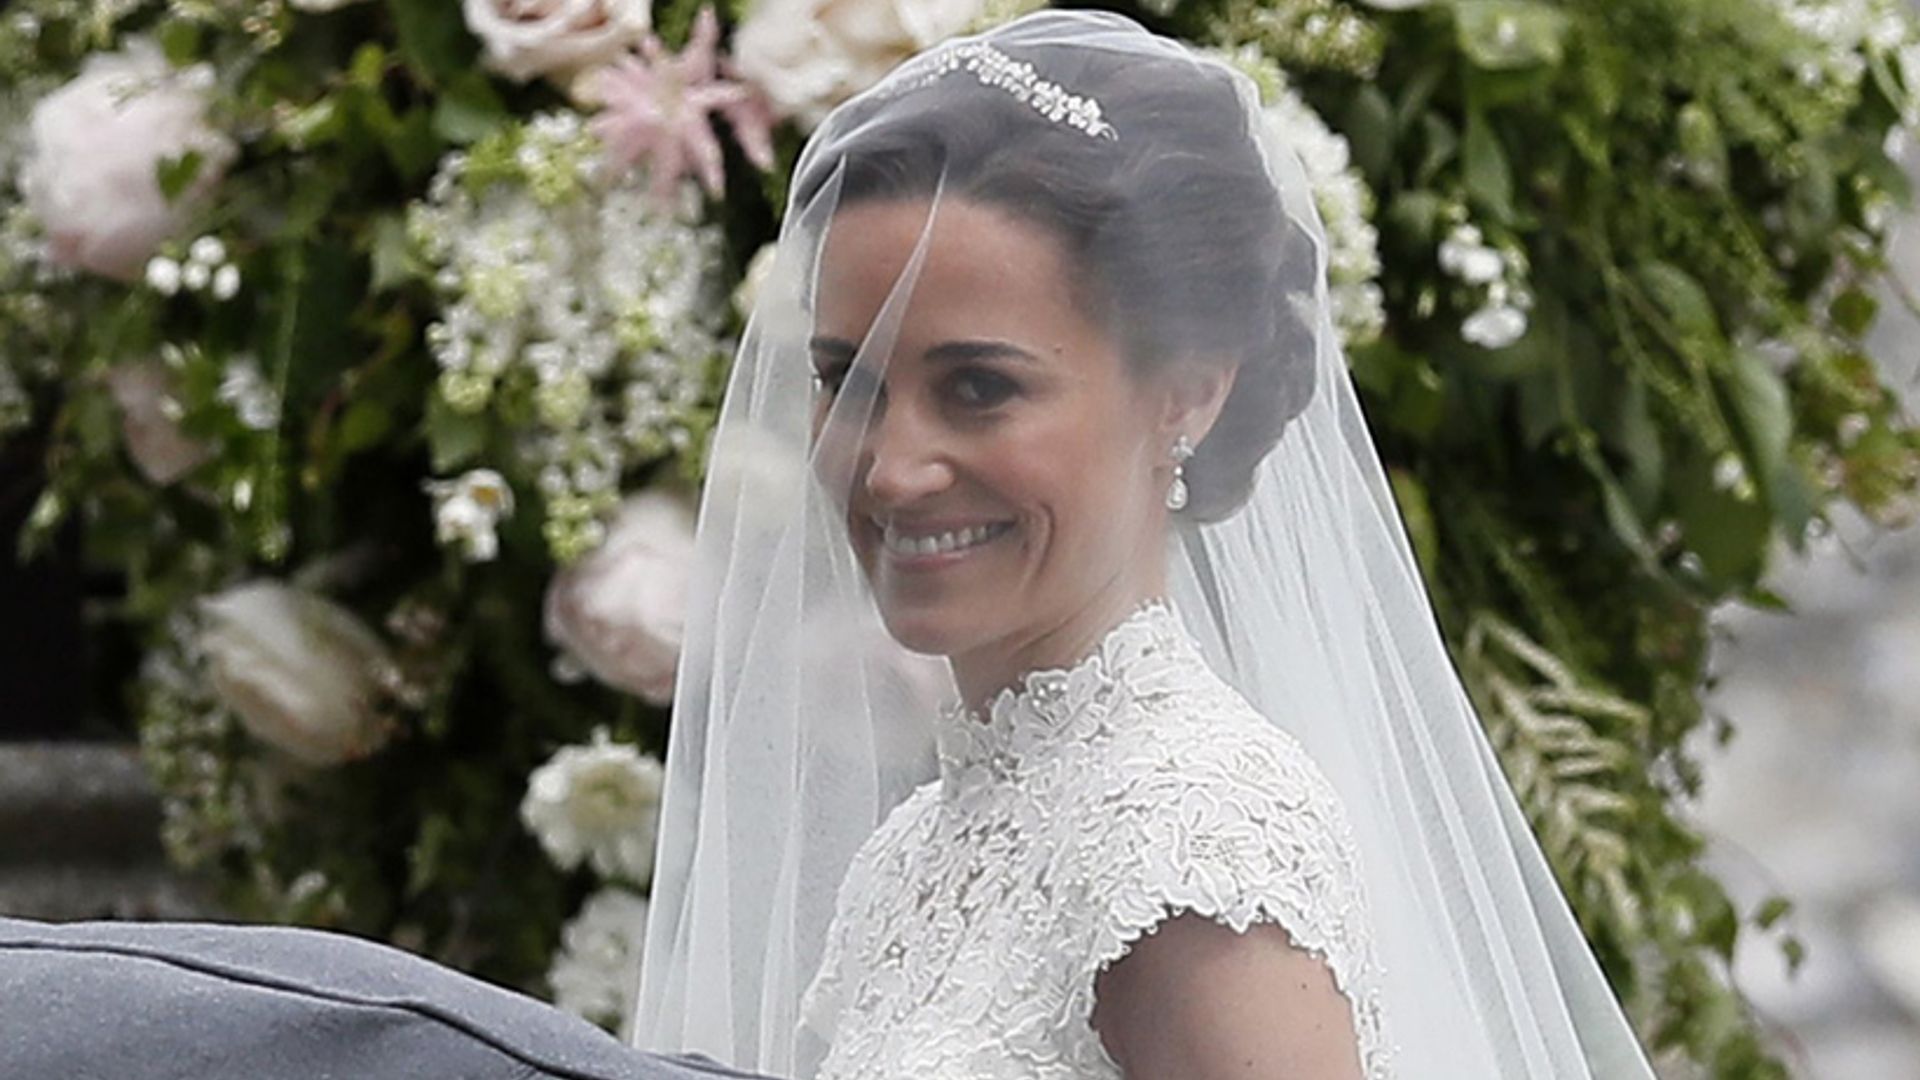 Blushing bride Pippa Middleton arrives for wedding with dad Michael